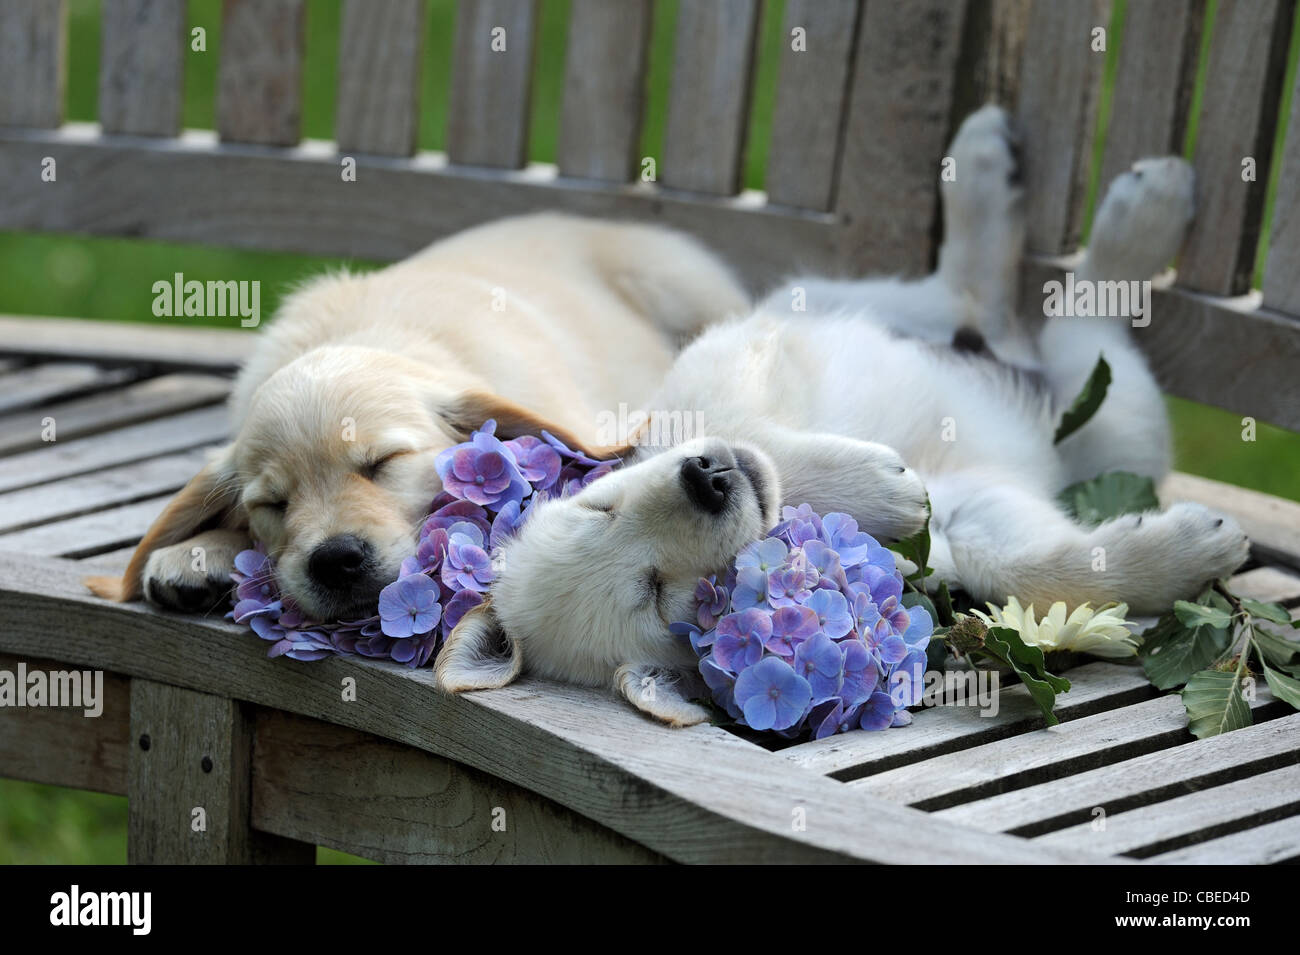 Golden Retriever (Canis lupus familiaris). Two puppies sleeping on a wooden bench. Stock Photo